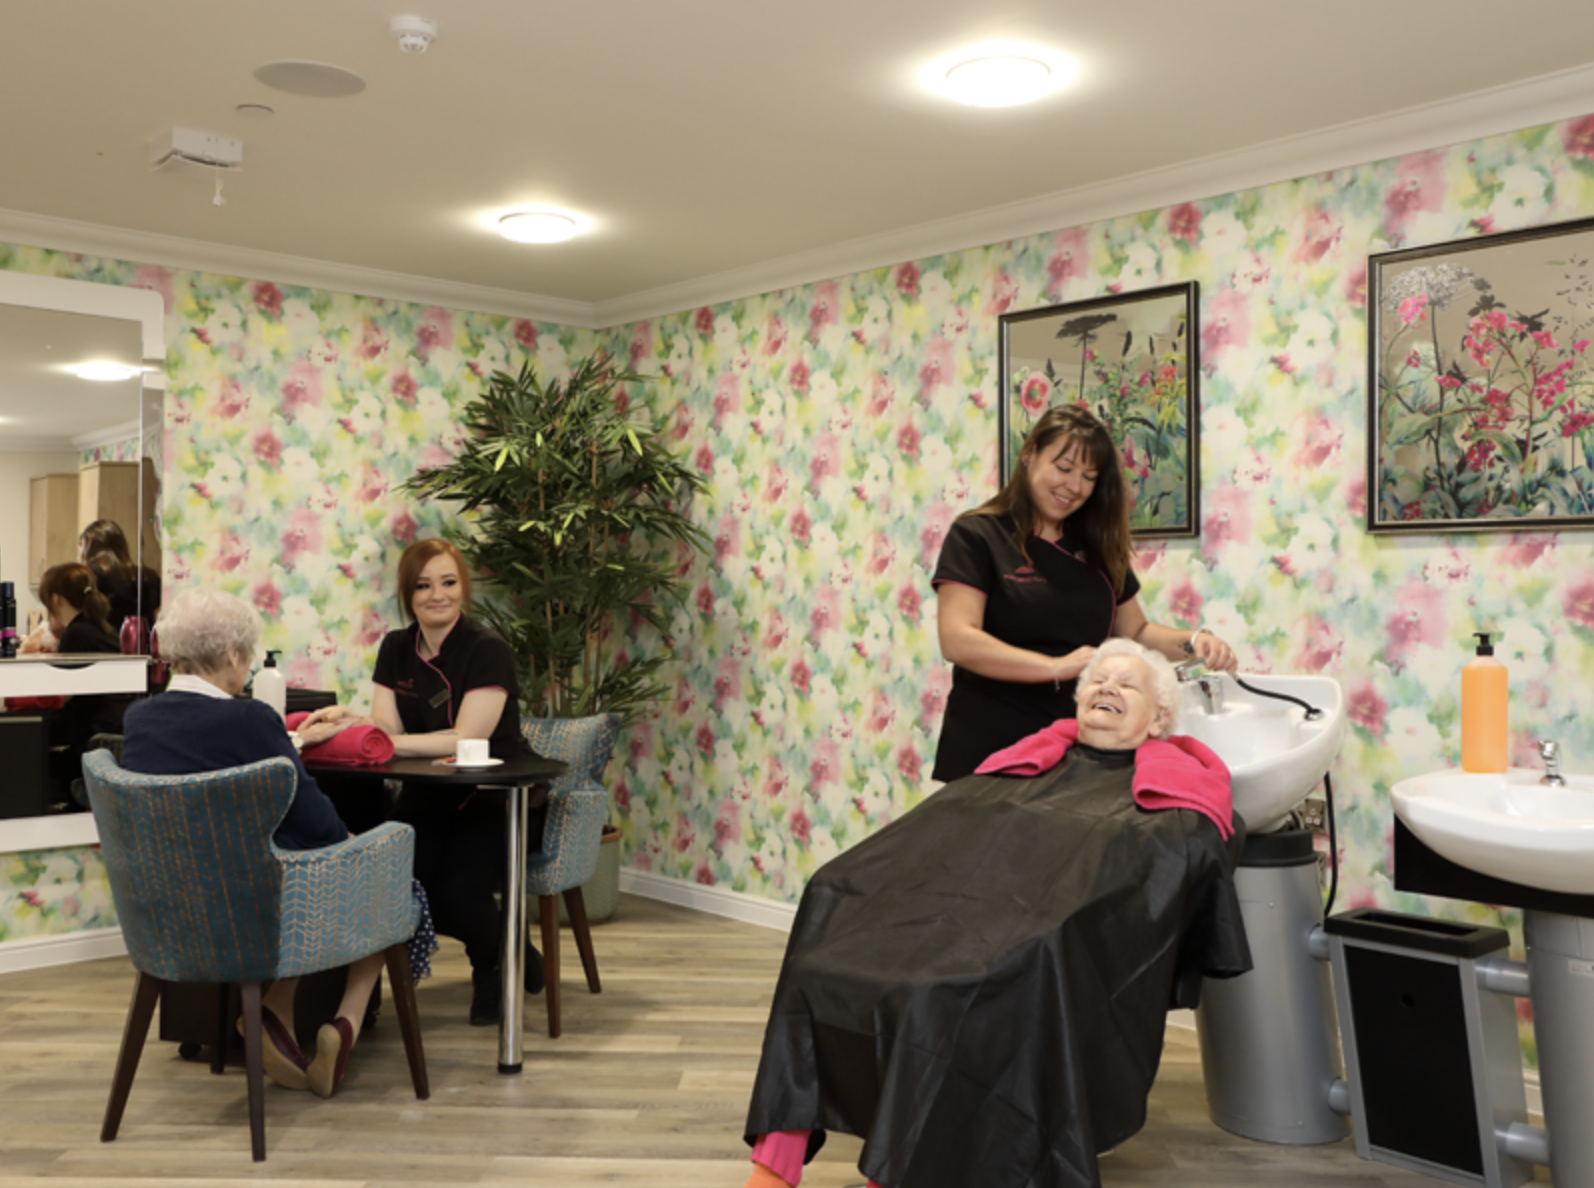 Salon of Jubilee House care home in Leamington Spa, West Midlands